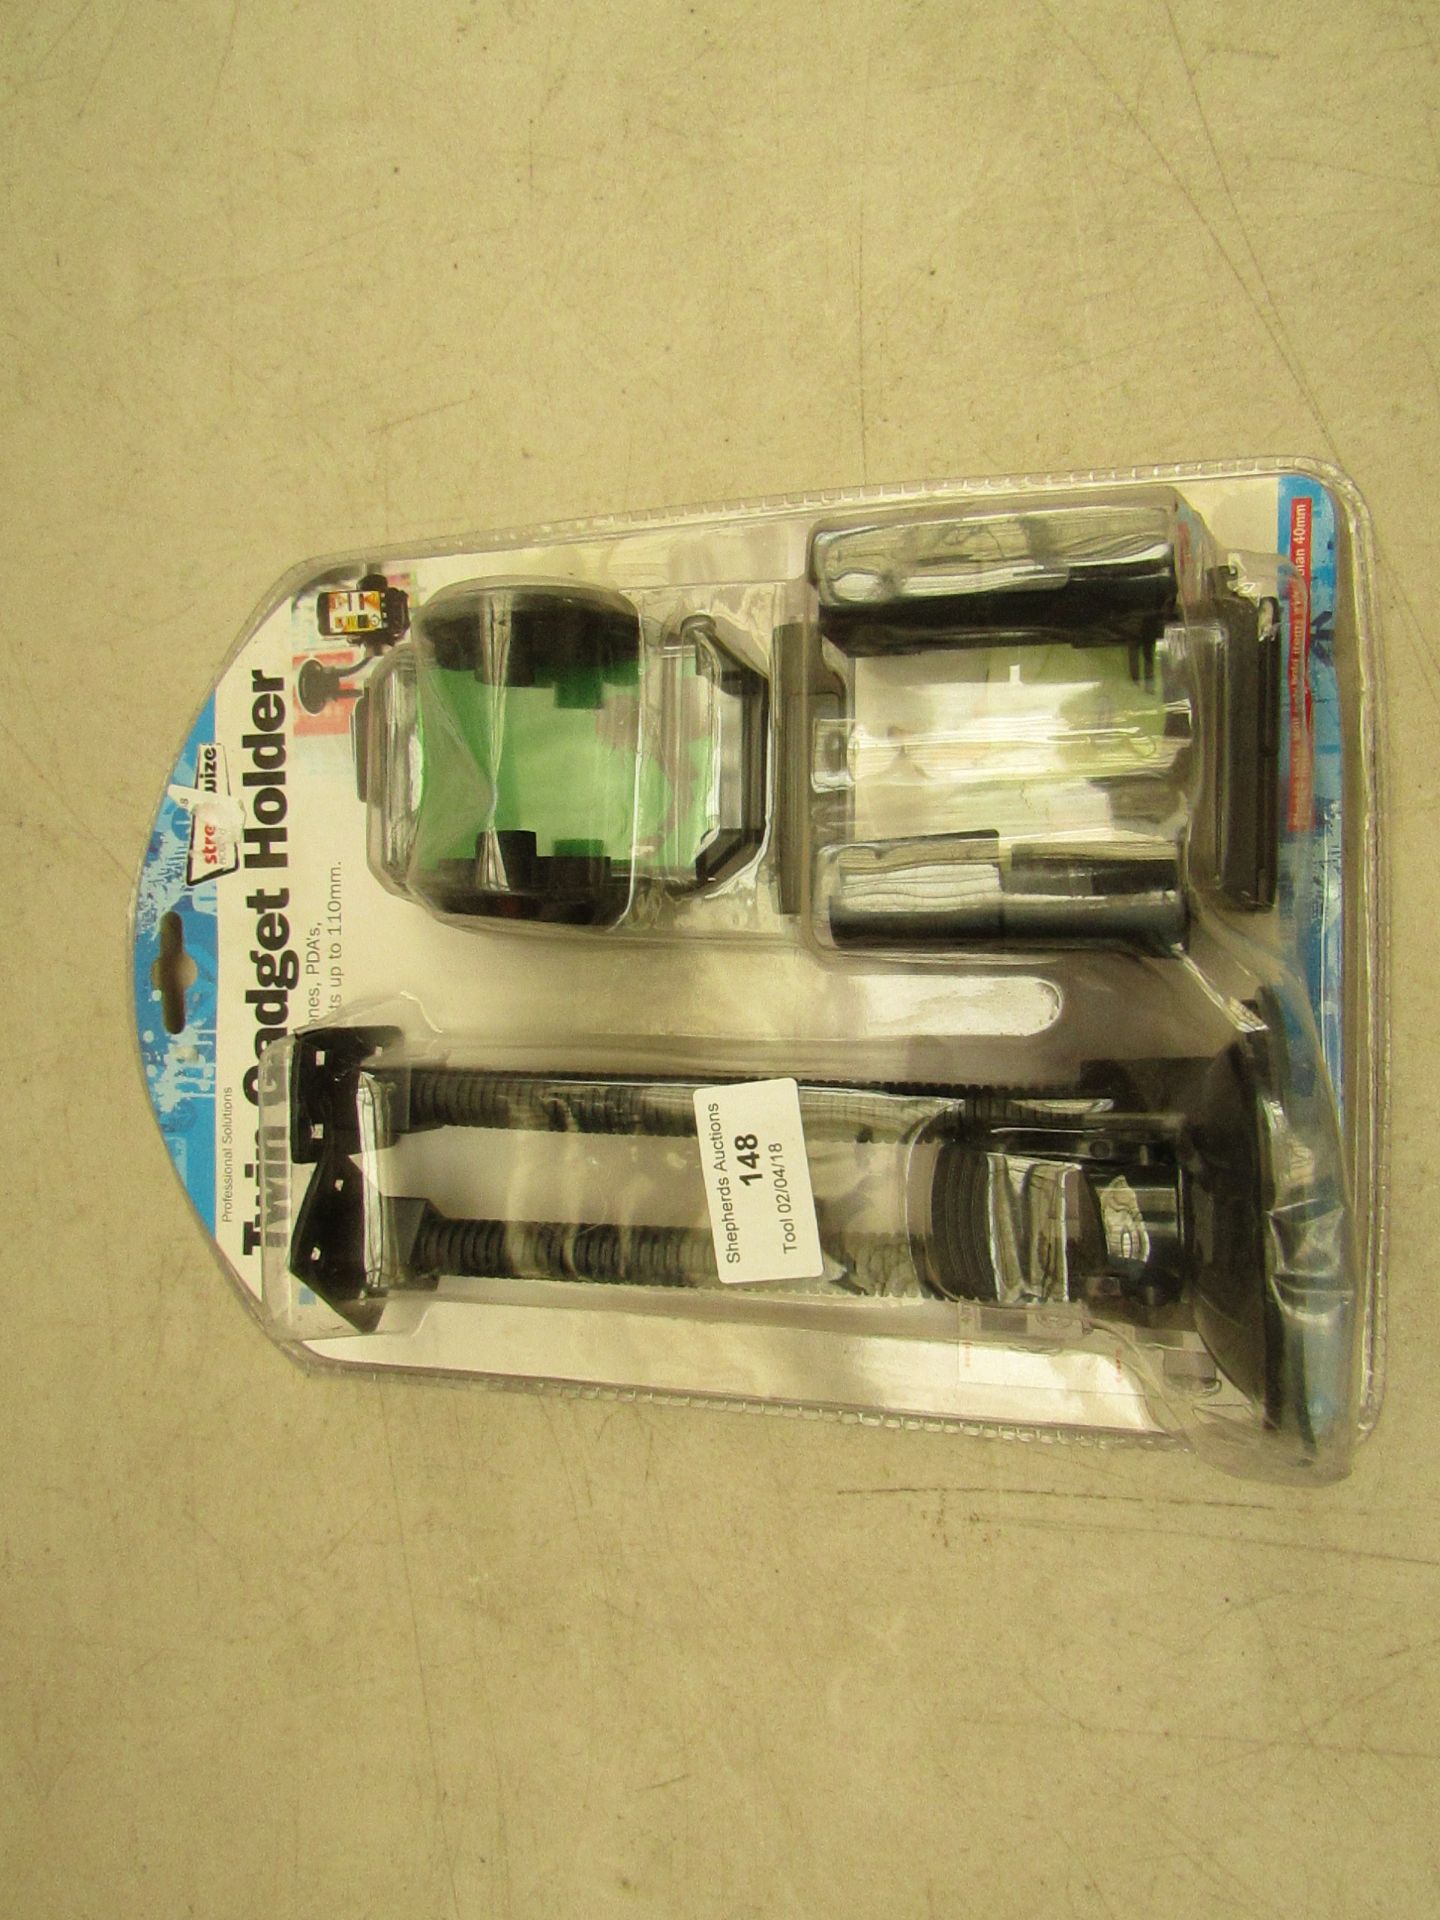 Streetwize twin gadget holder, in packaging and unchecked